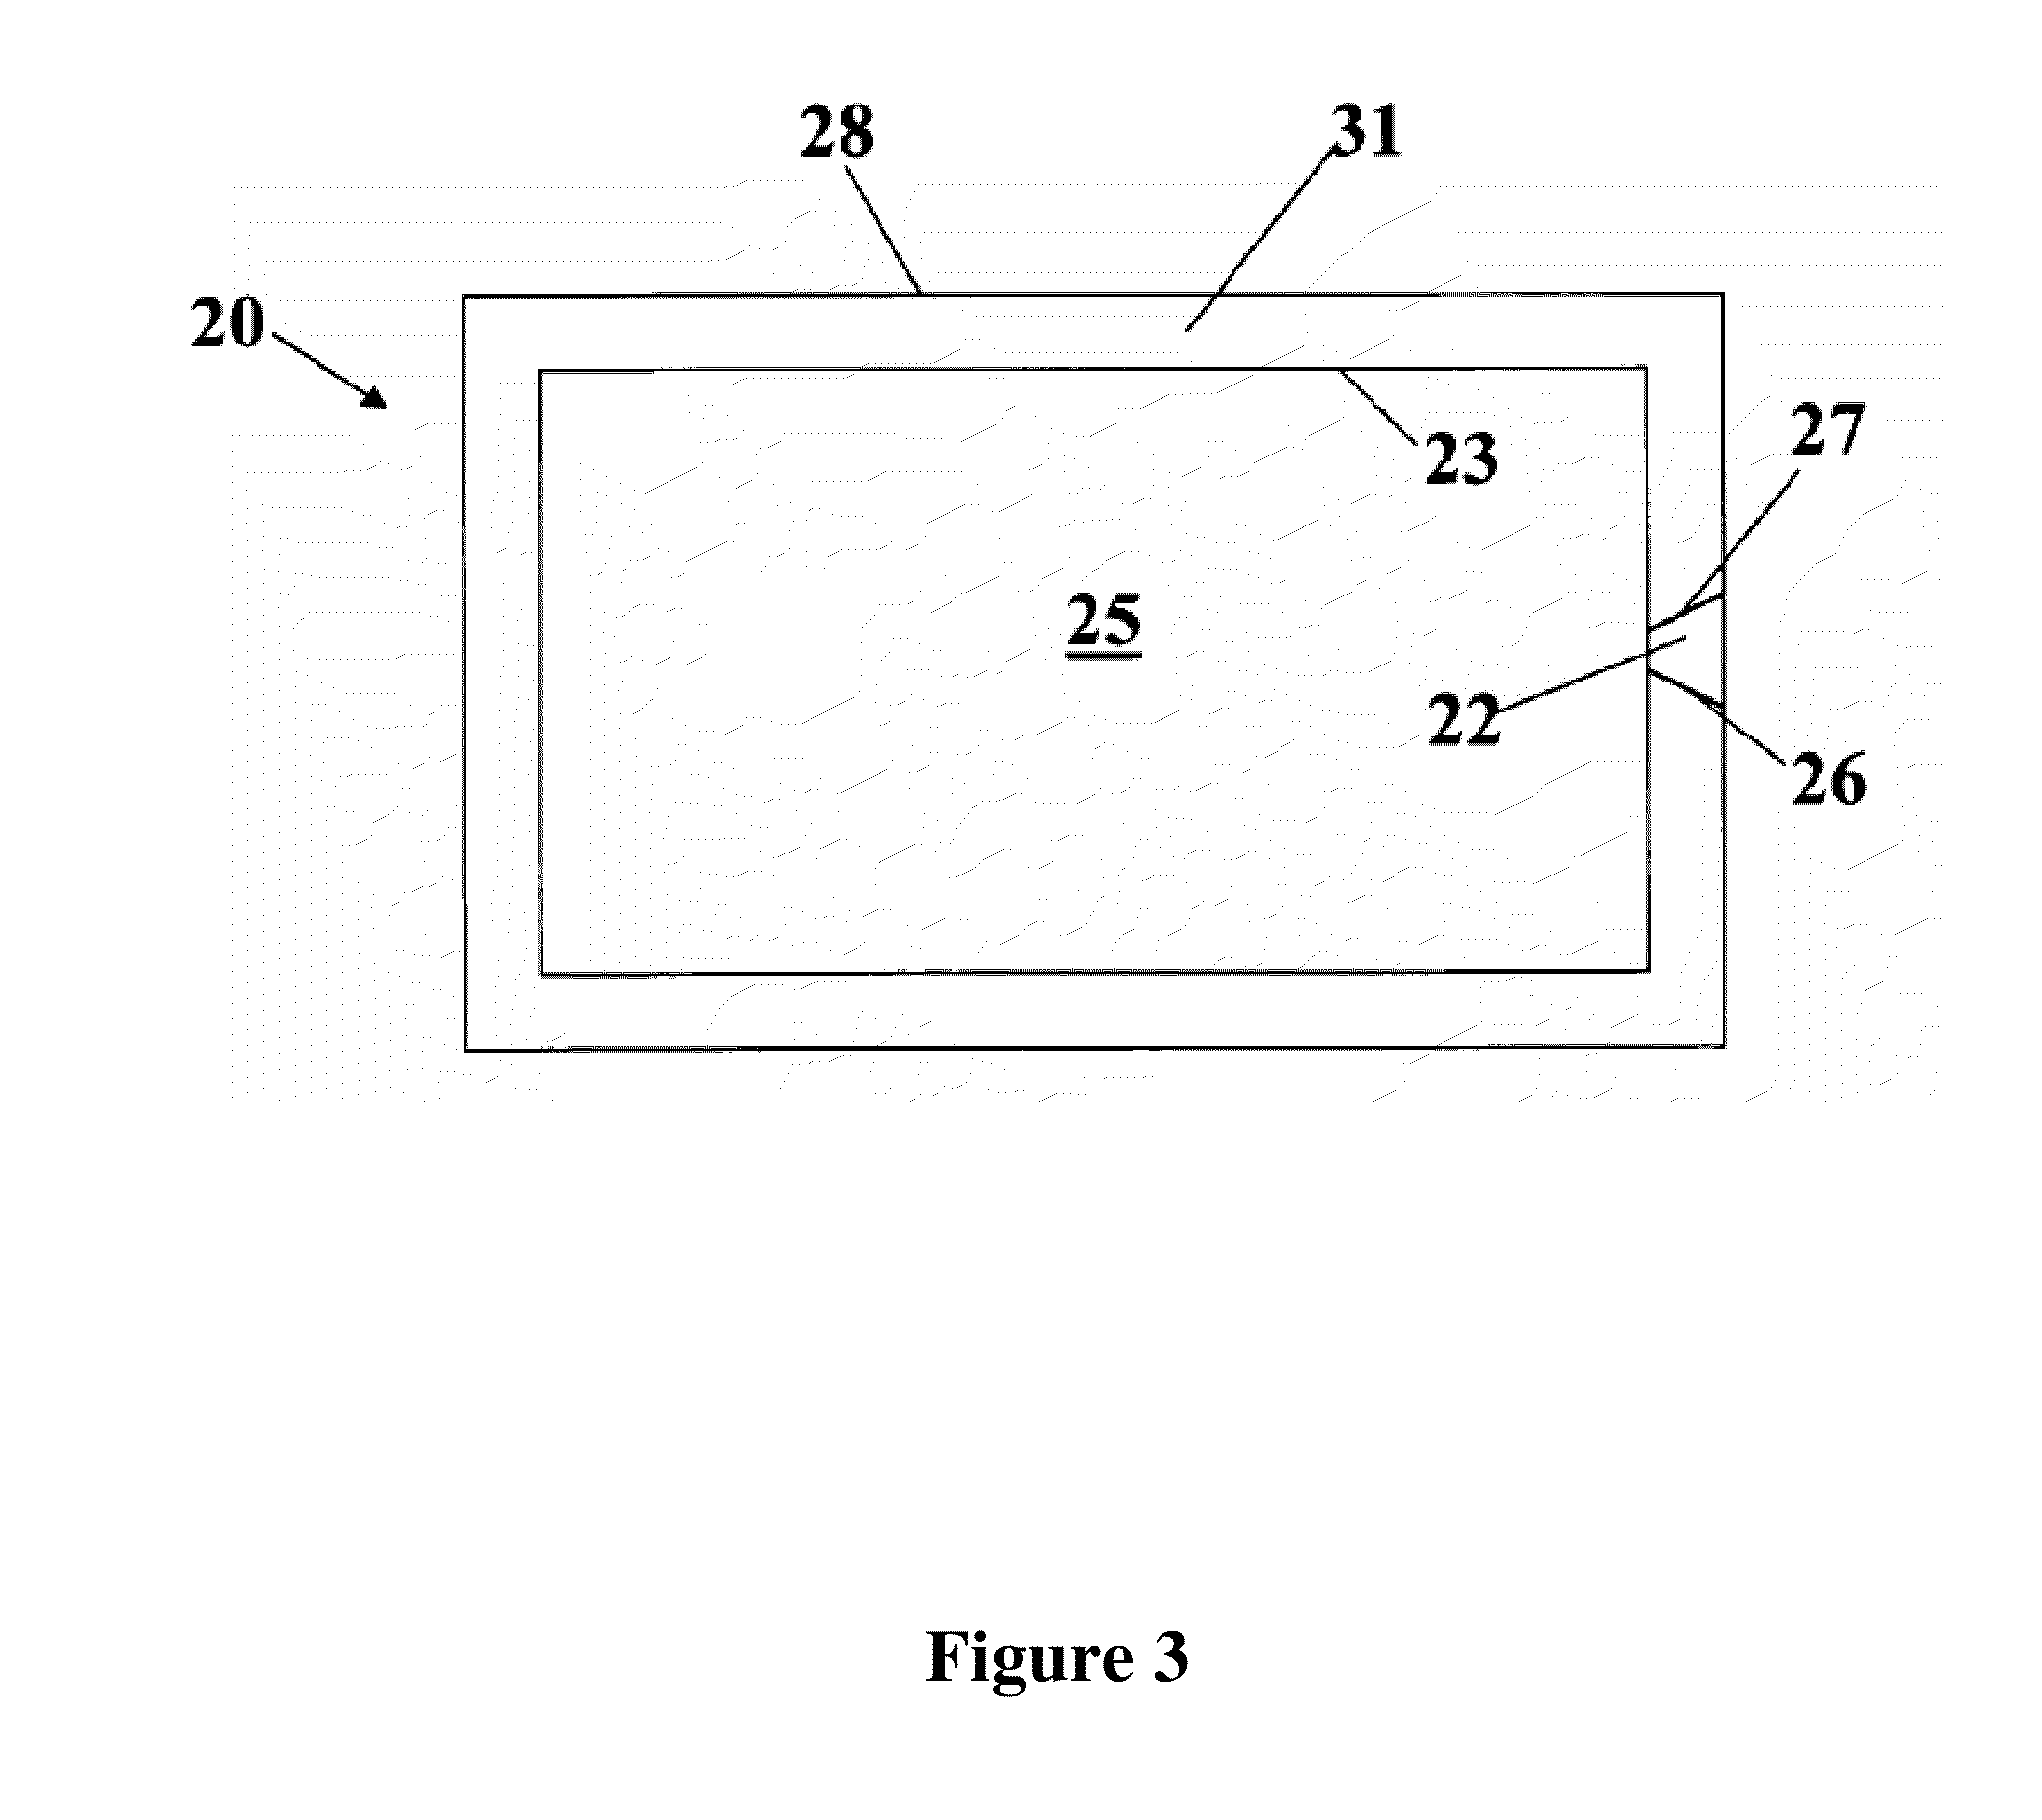 Stabilized compositions of alkylating agents and methods of using same